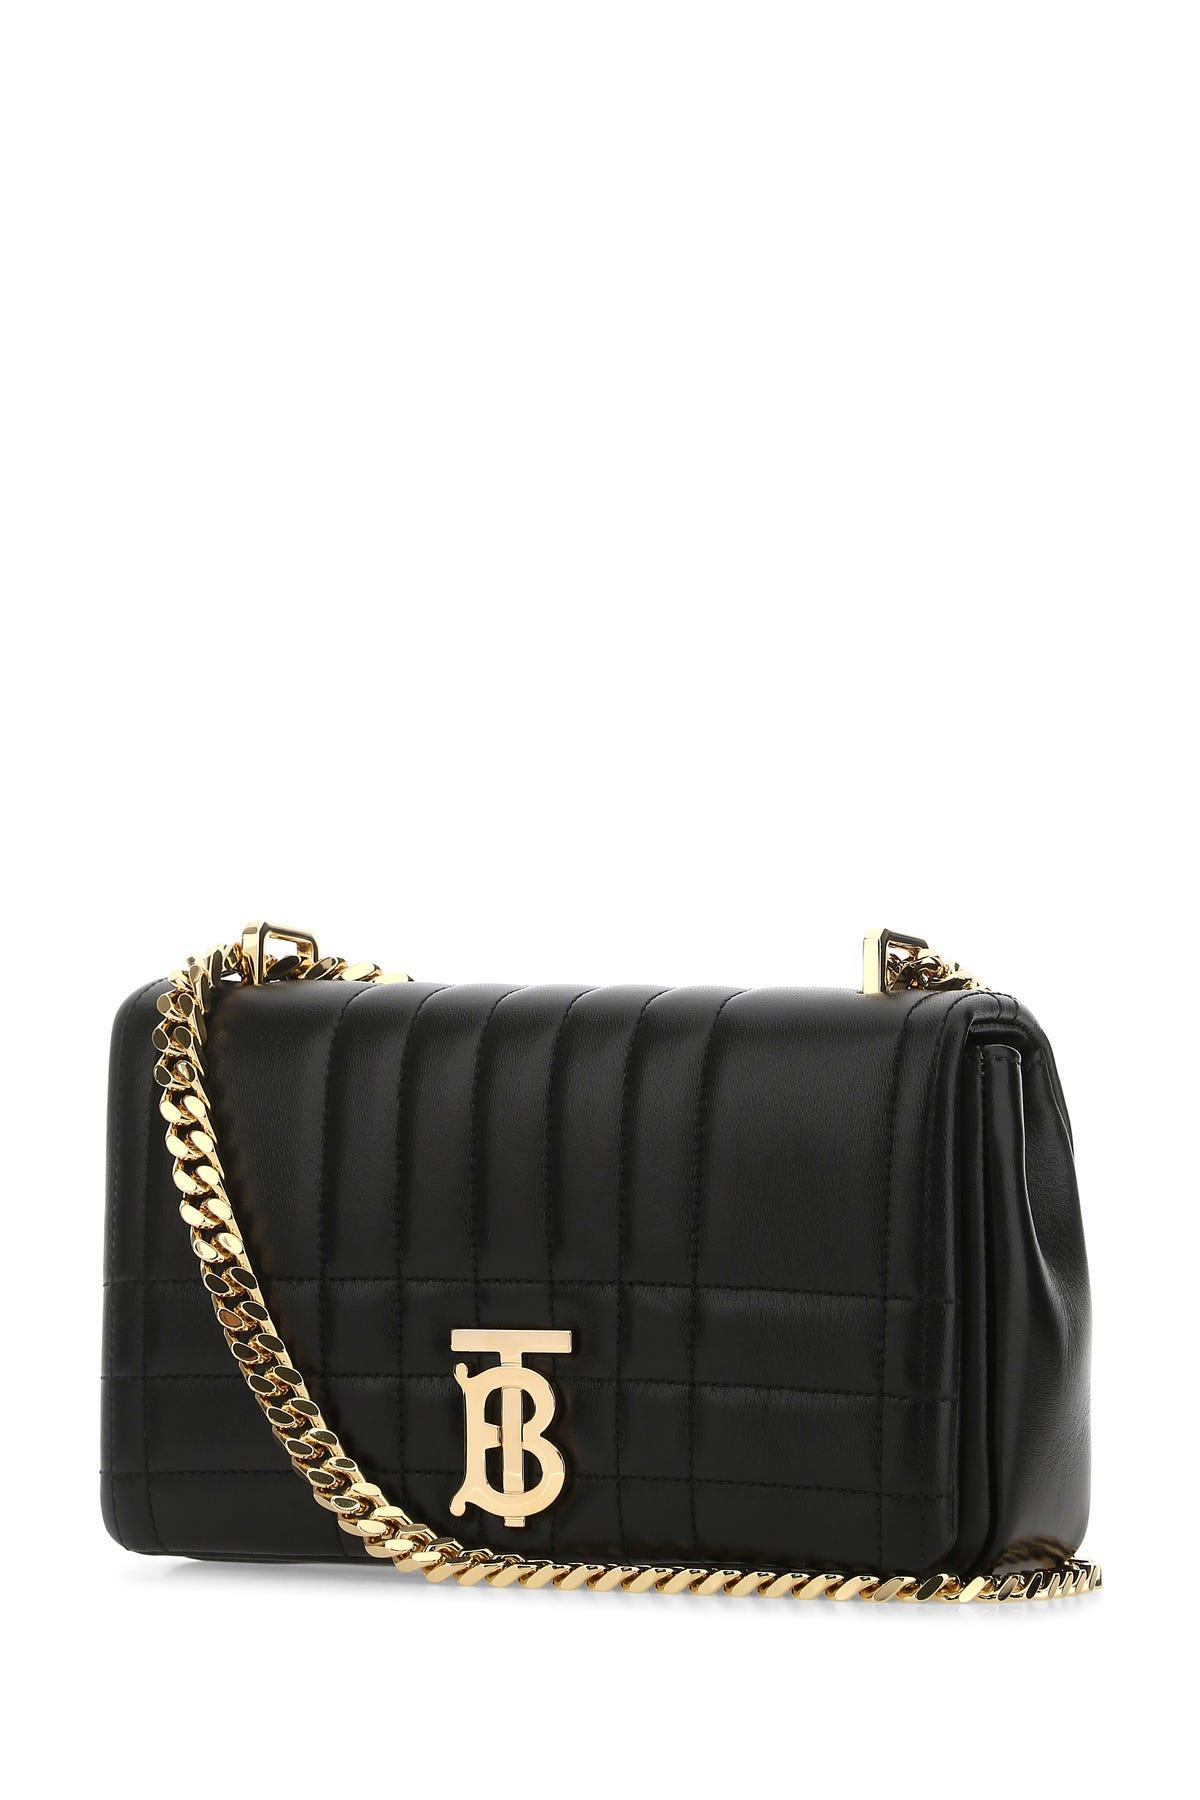 Burberry Lola Mini Quilted-leather Cross-body Bag - Black - ShopStyle